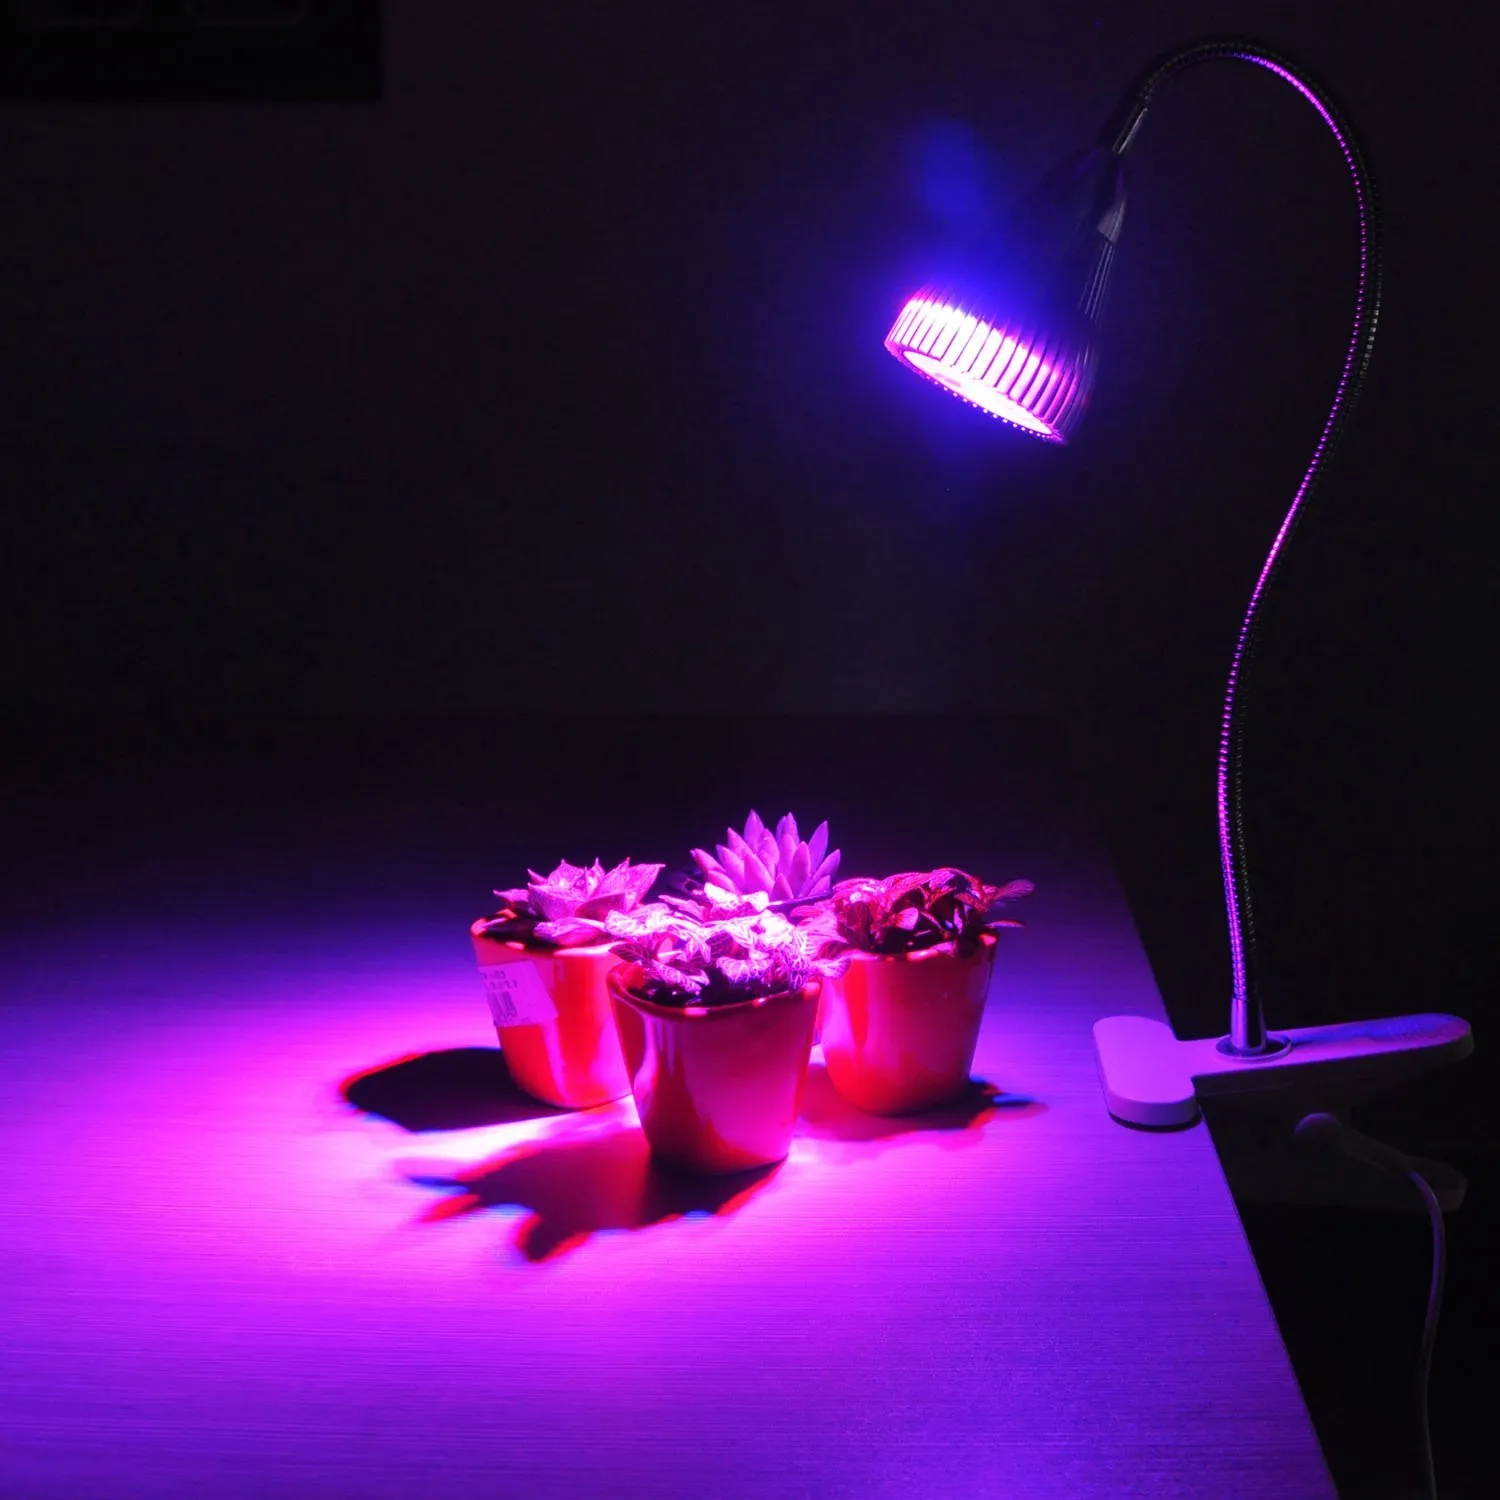 LED Grow Lights 7W Desk Lamp Full Spectrum with Spring Clamp and Gooseneck Arm for Indoor Plant Hydroponic Gar